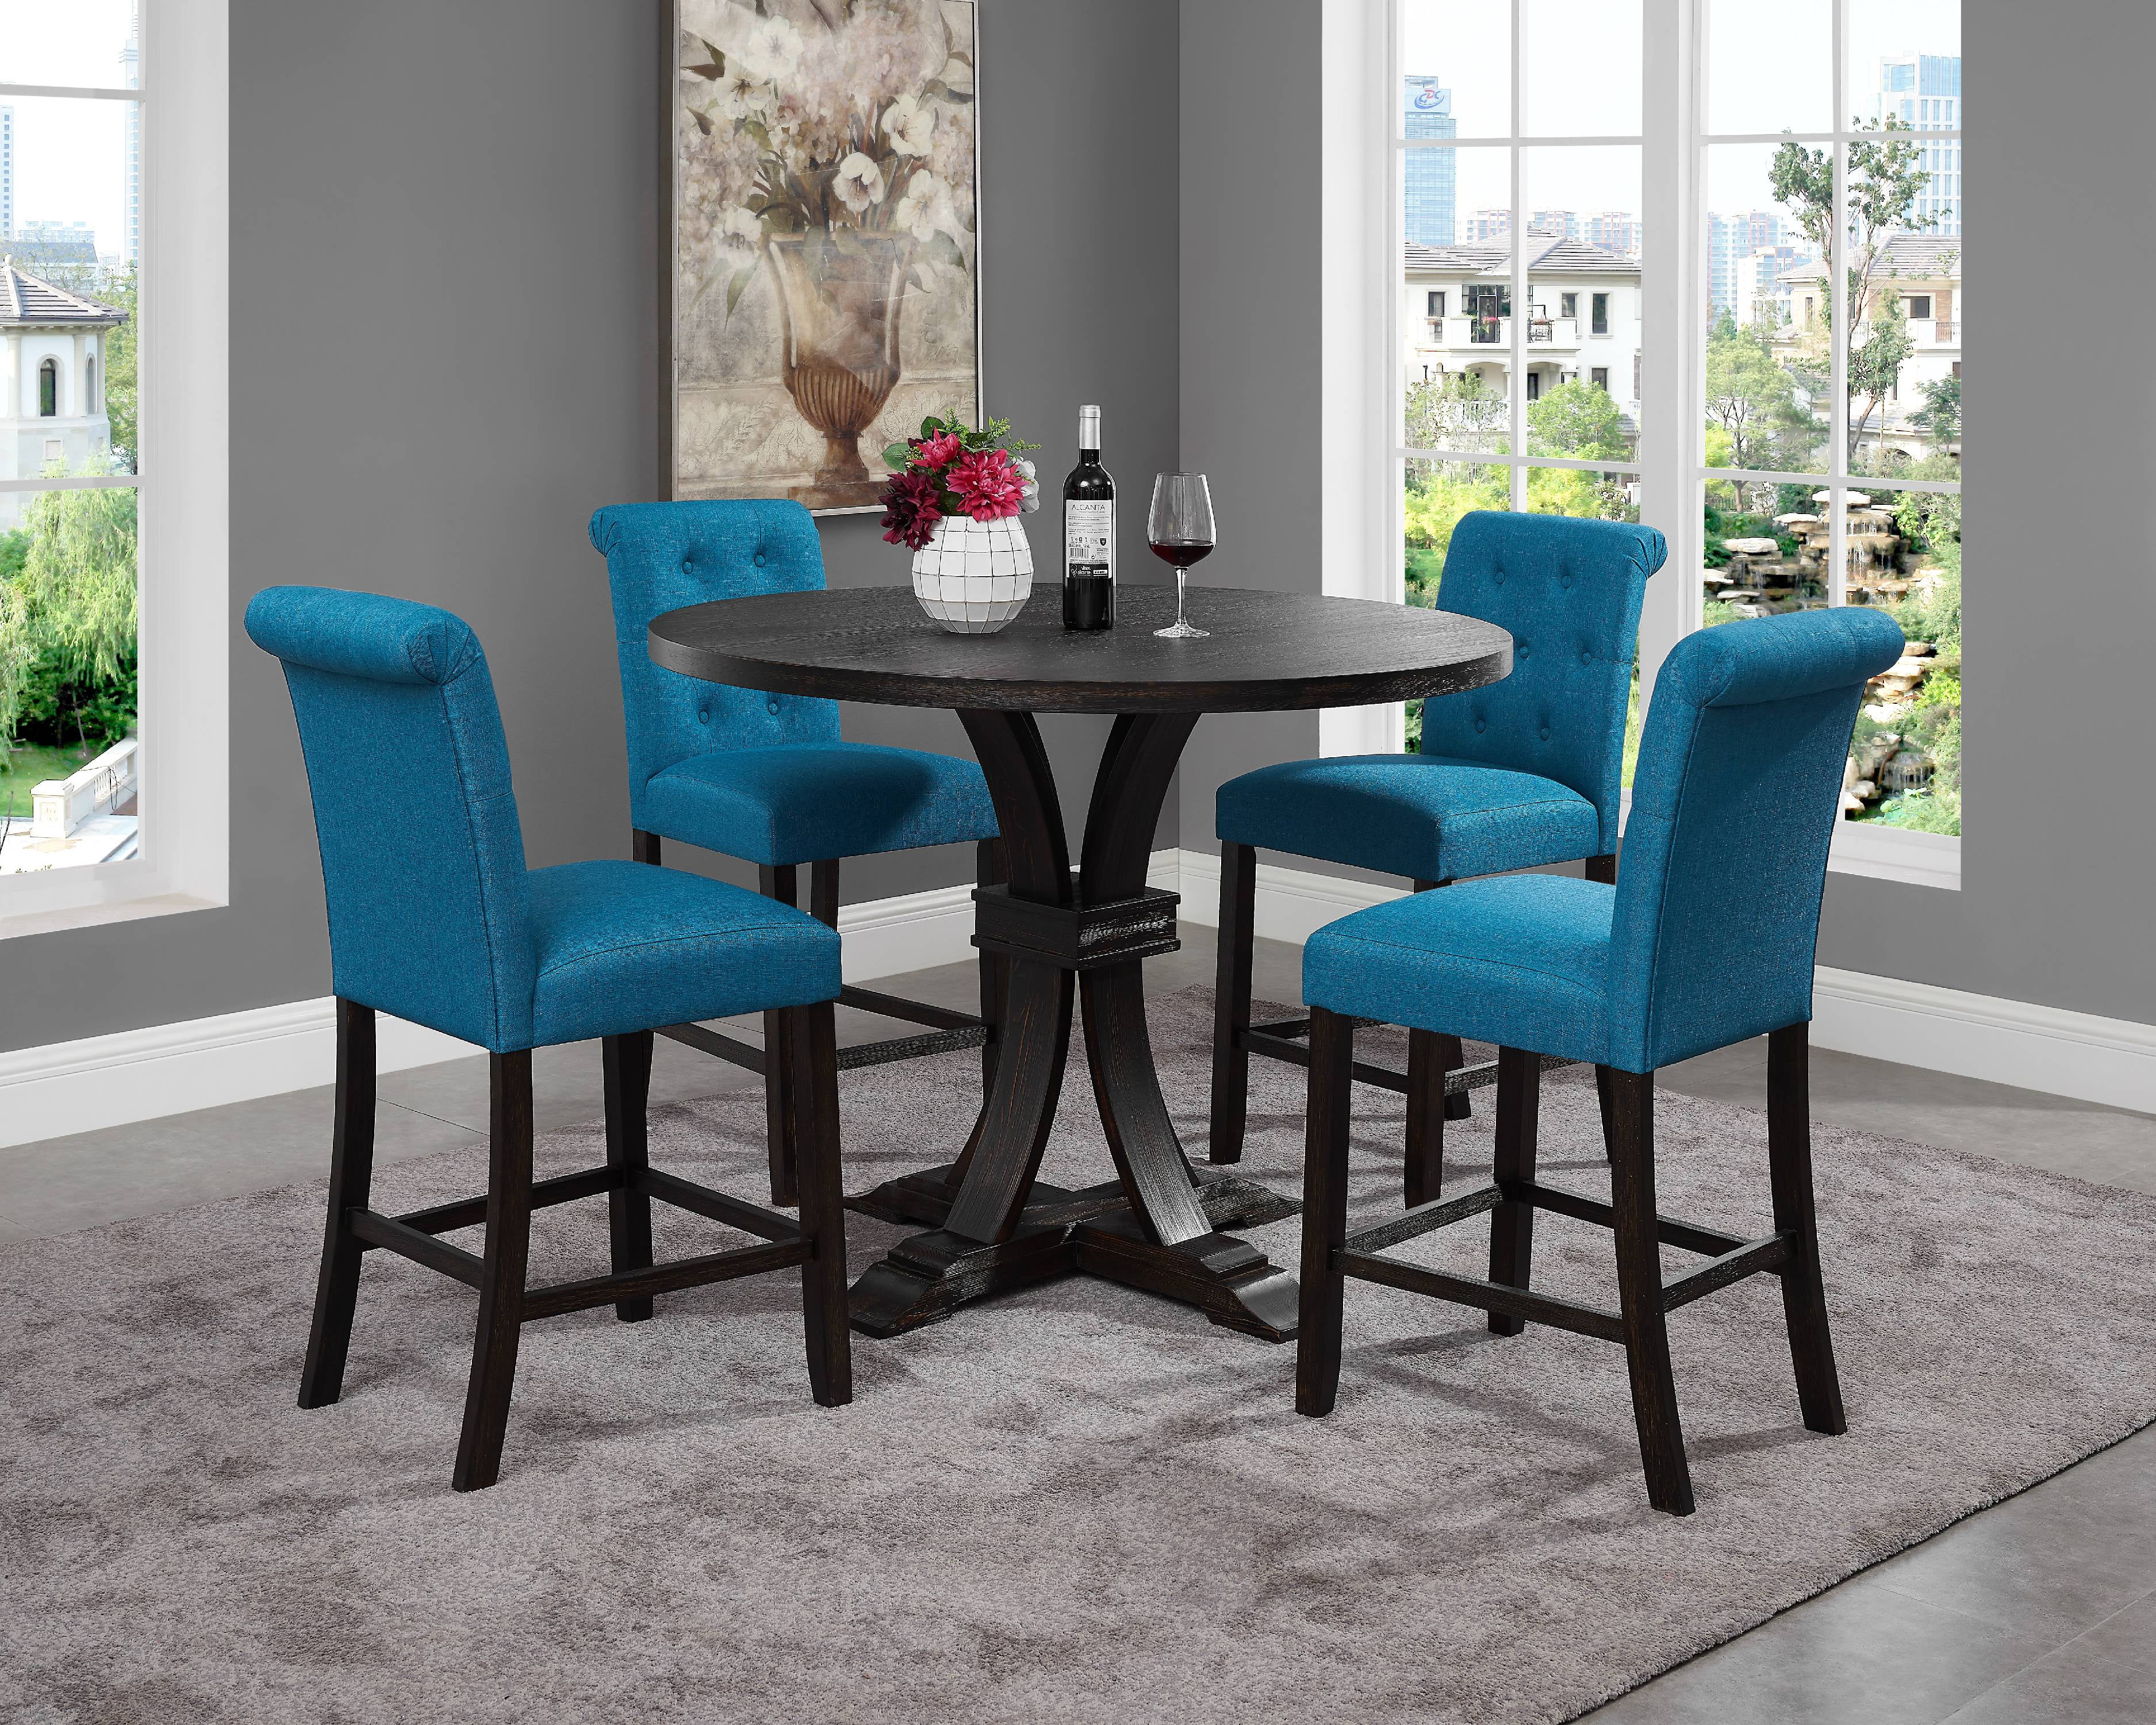 Siena Distressed Black Finish 5-Piece Counter Height Dining set